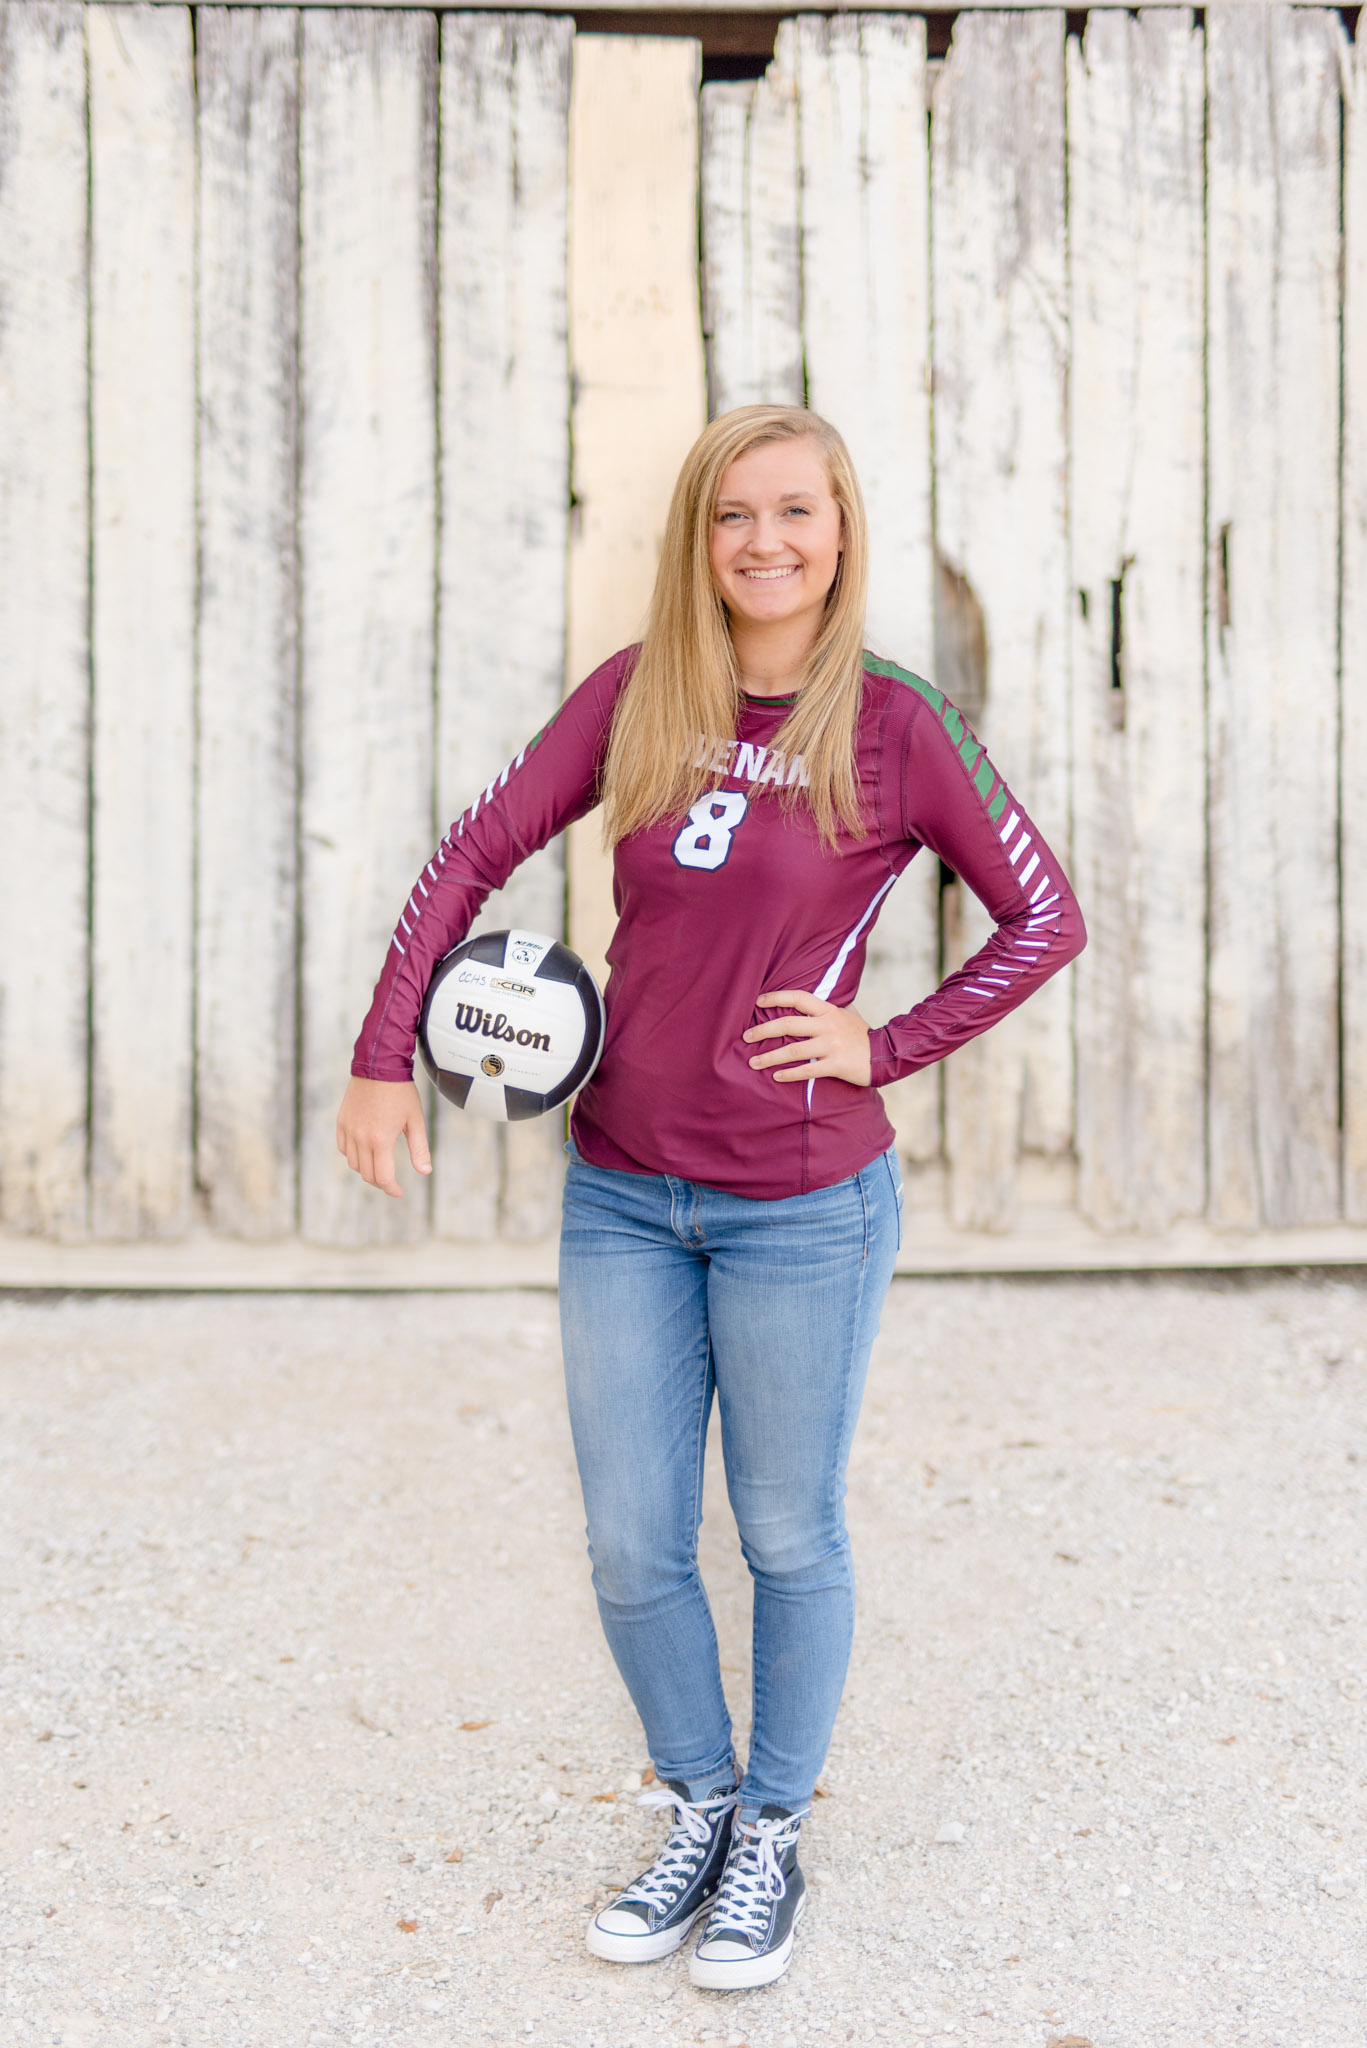 High School senior stand in front of white wall with volleyball